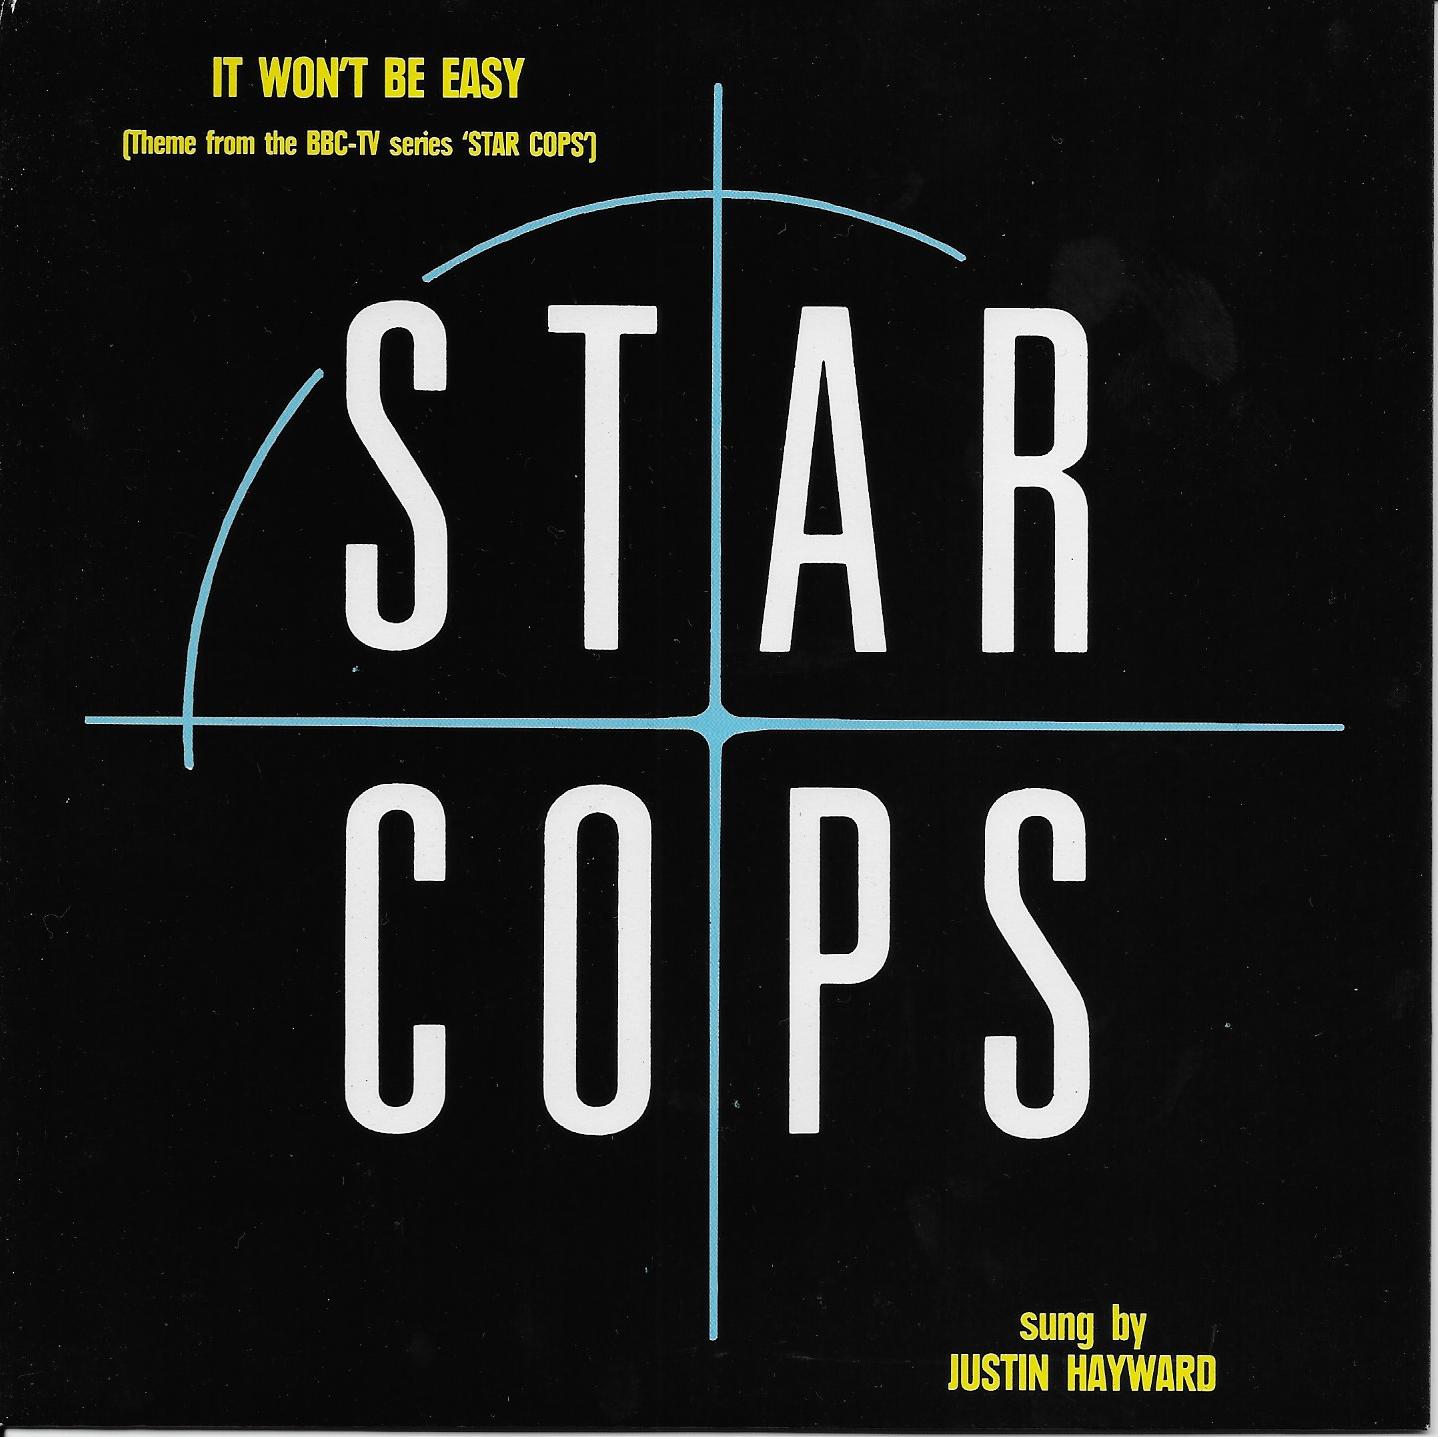 Picture of RESL 208 It won't be easy (Star cops) by artist Justin Hayward / Tony Visconti from the BBC records and Tapes library